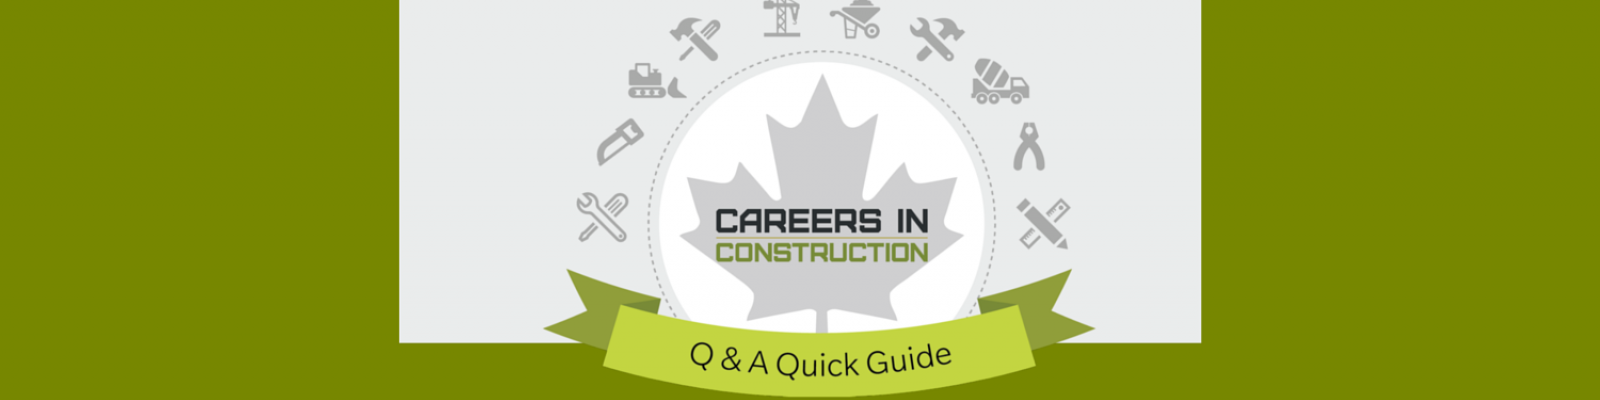 Banner for the Careers in Construction Q&A Quick Guide for Parents